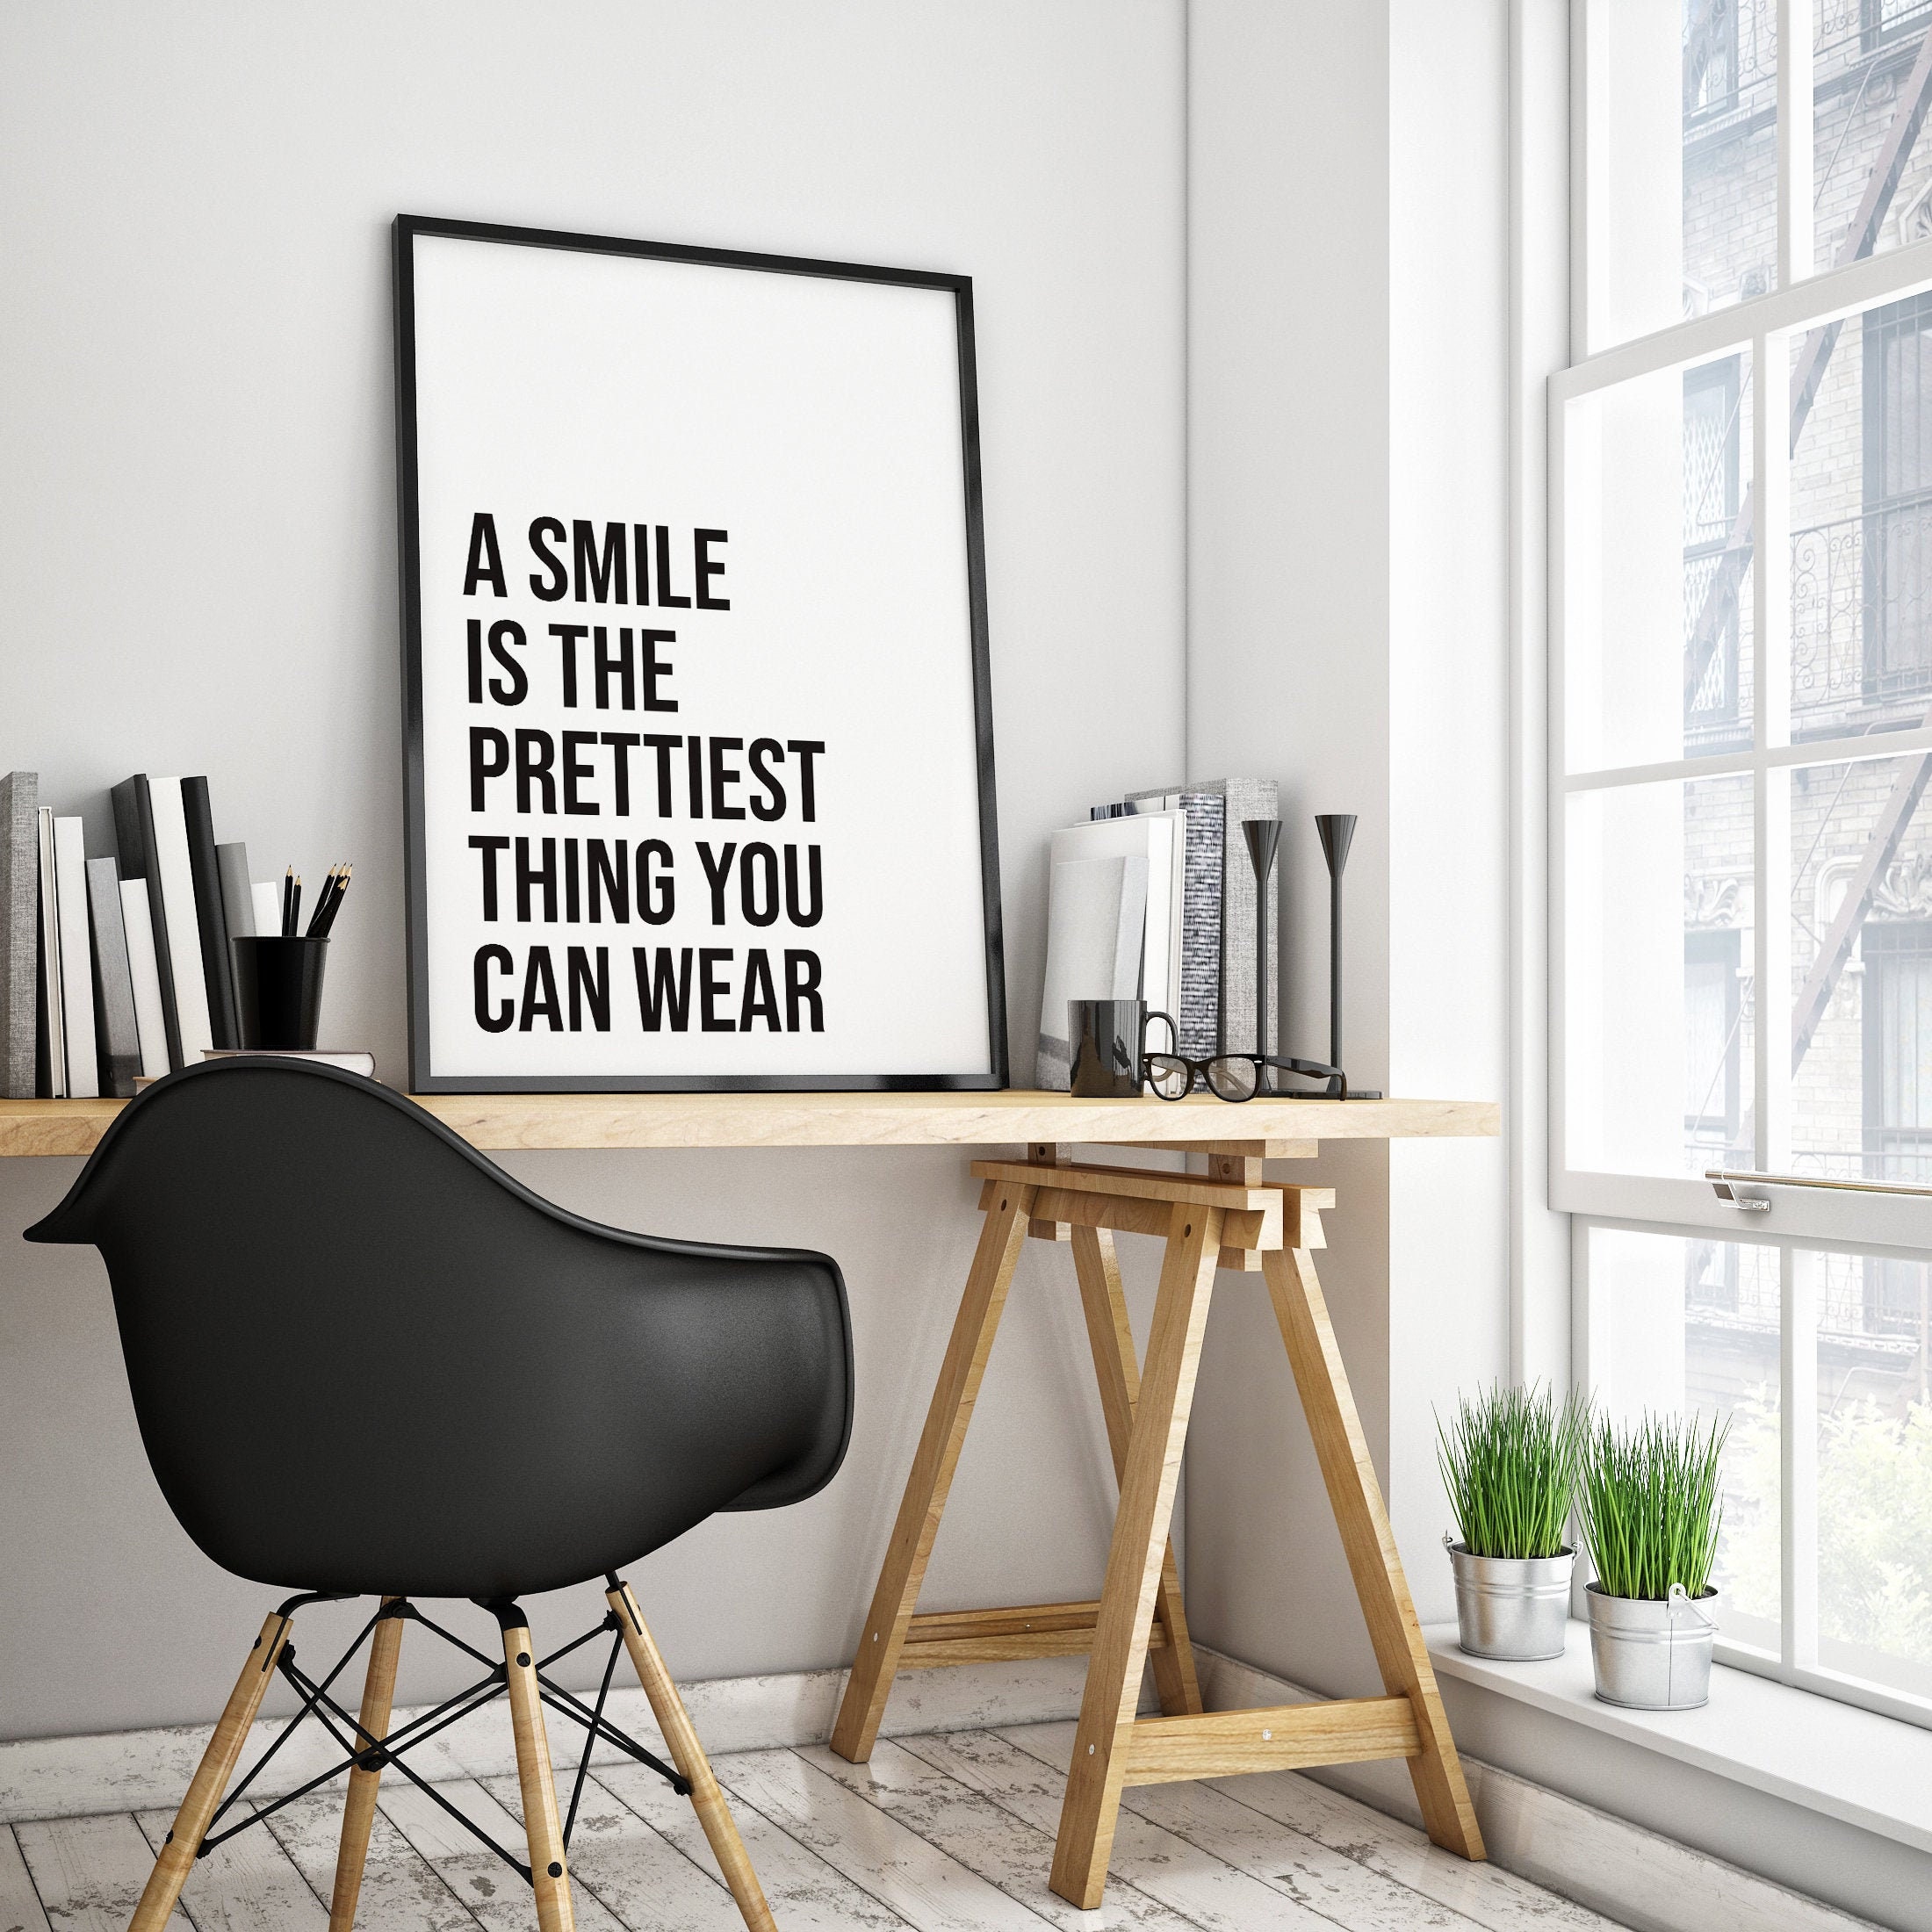 A Smile is the Prettiest Thing Typography Print Art Poster Inspiration Love